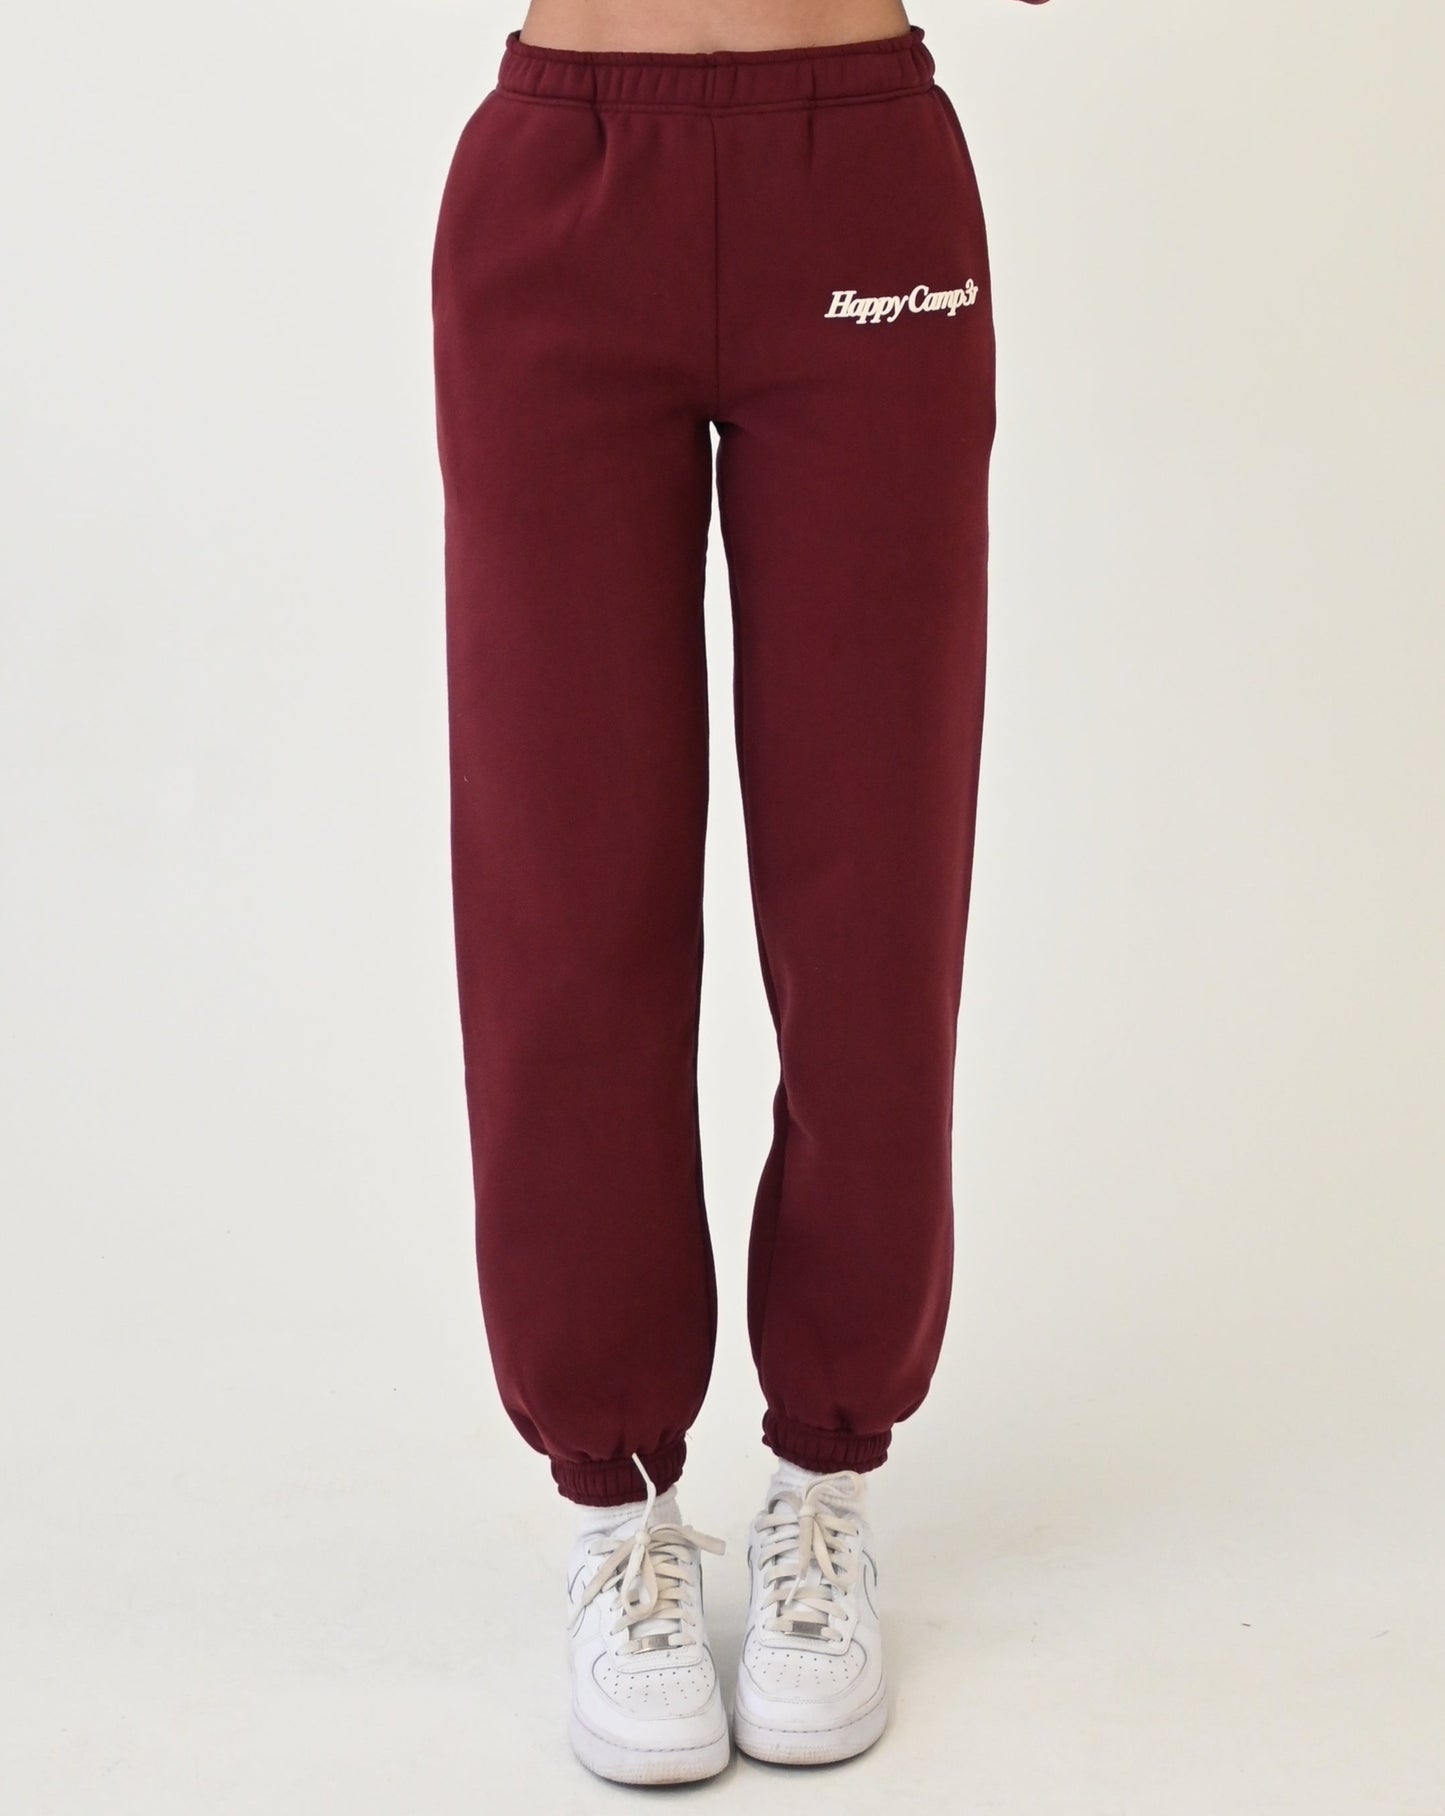 You Deserve the World Sweatpants - Wine Red